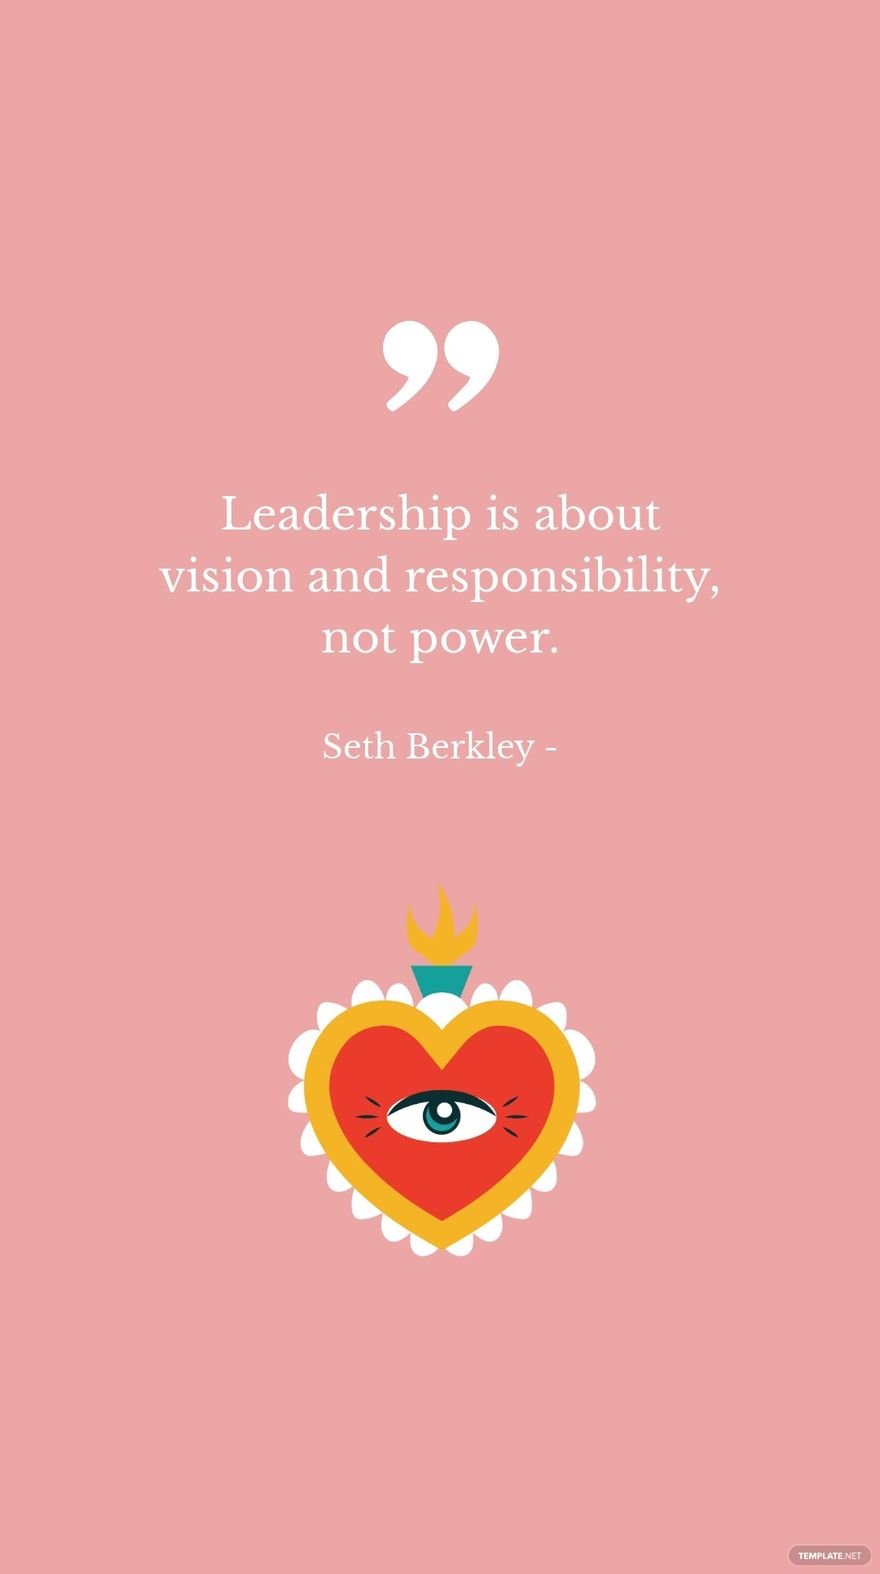 Seth Berkley - Leadership is about vision and responsibility, not power. in JPG